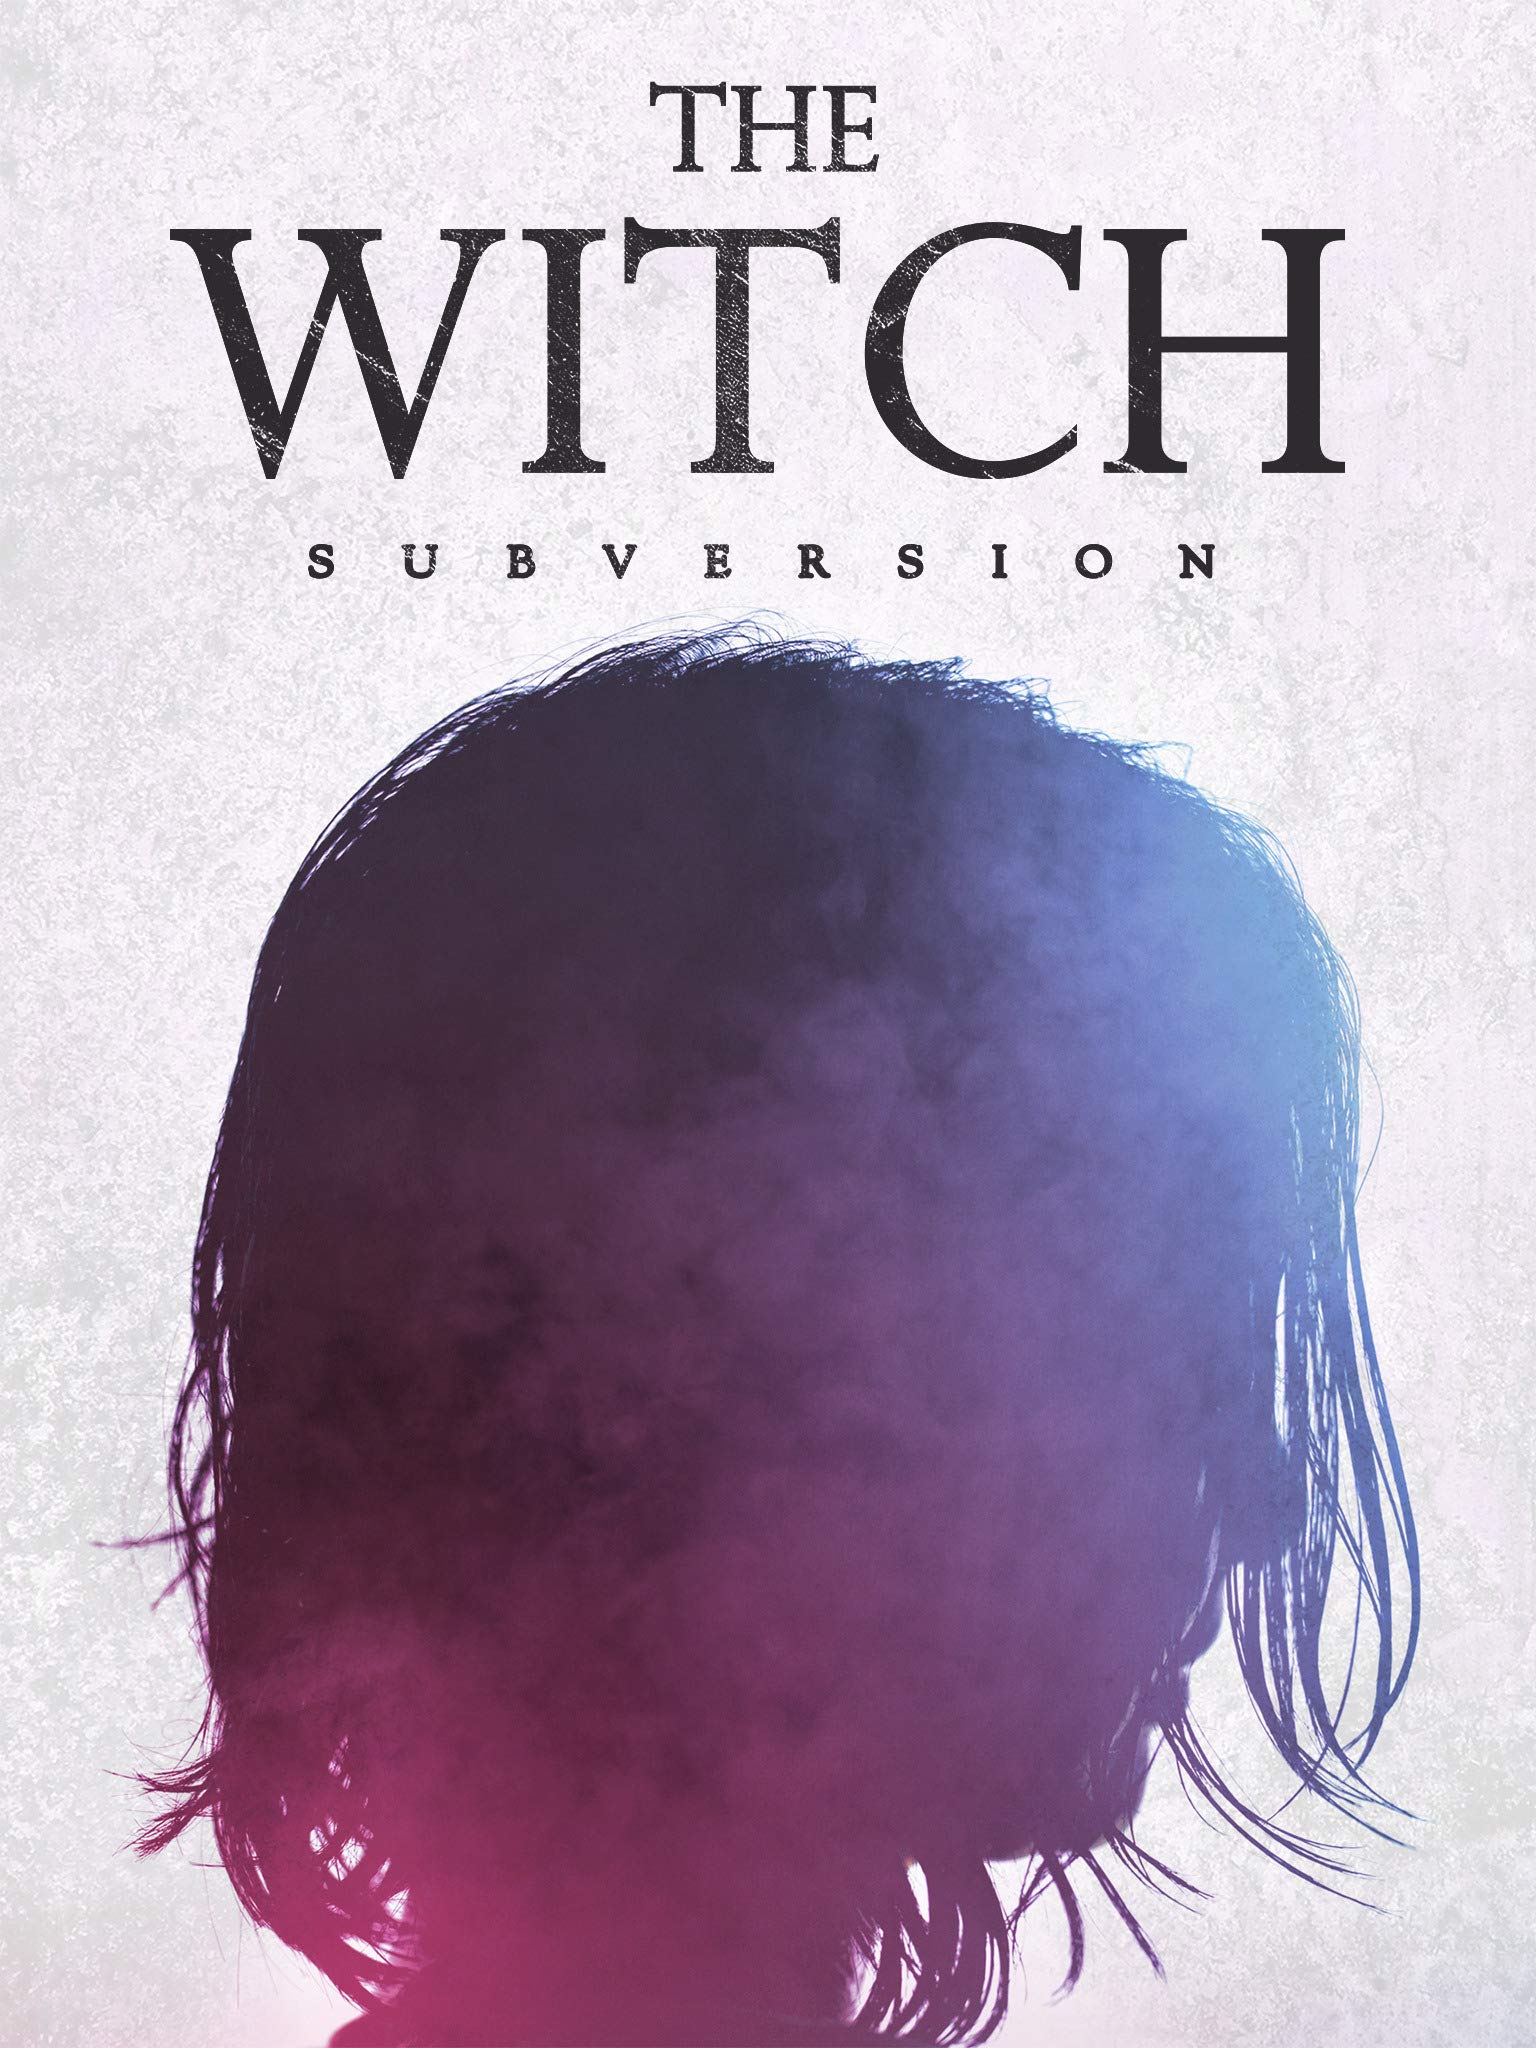 the witch part 1. the subversion sypnosis